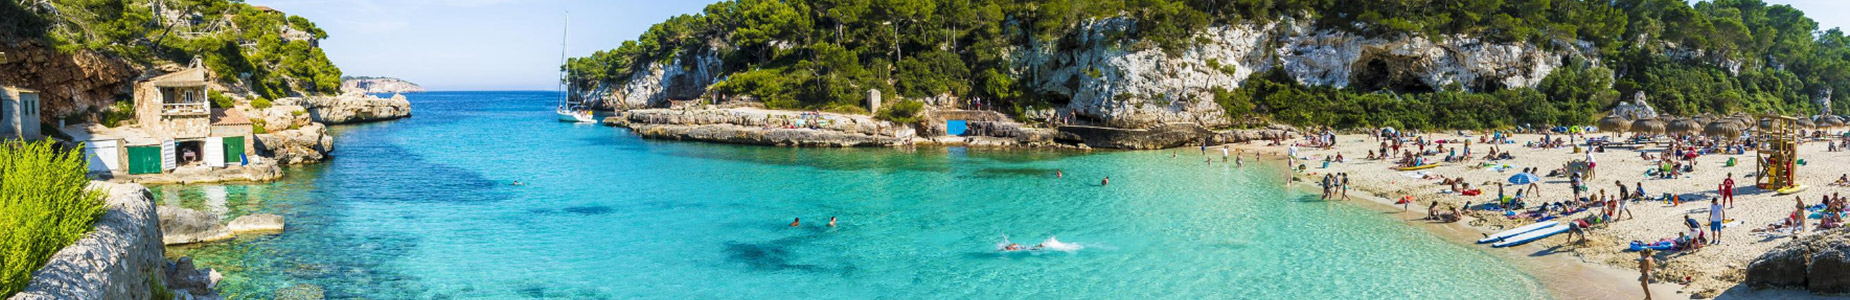 Adults Only hotels Mallorca